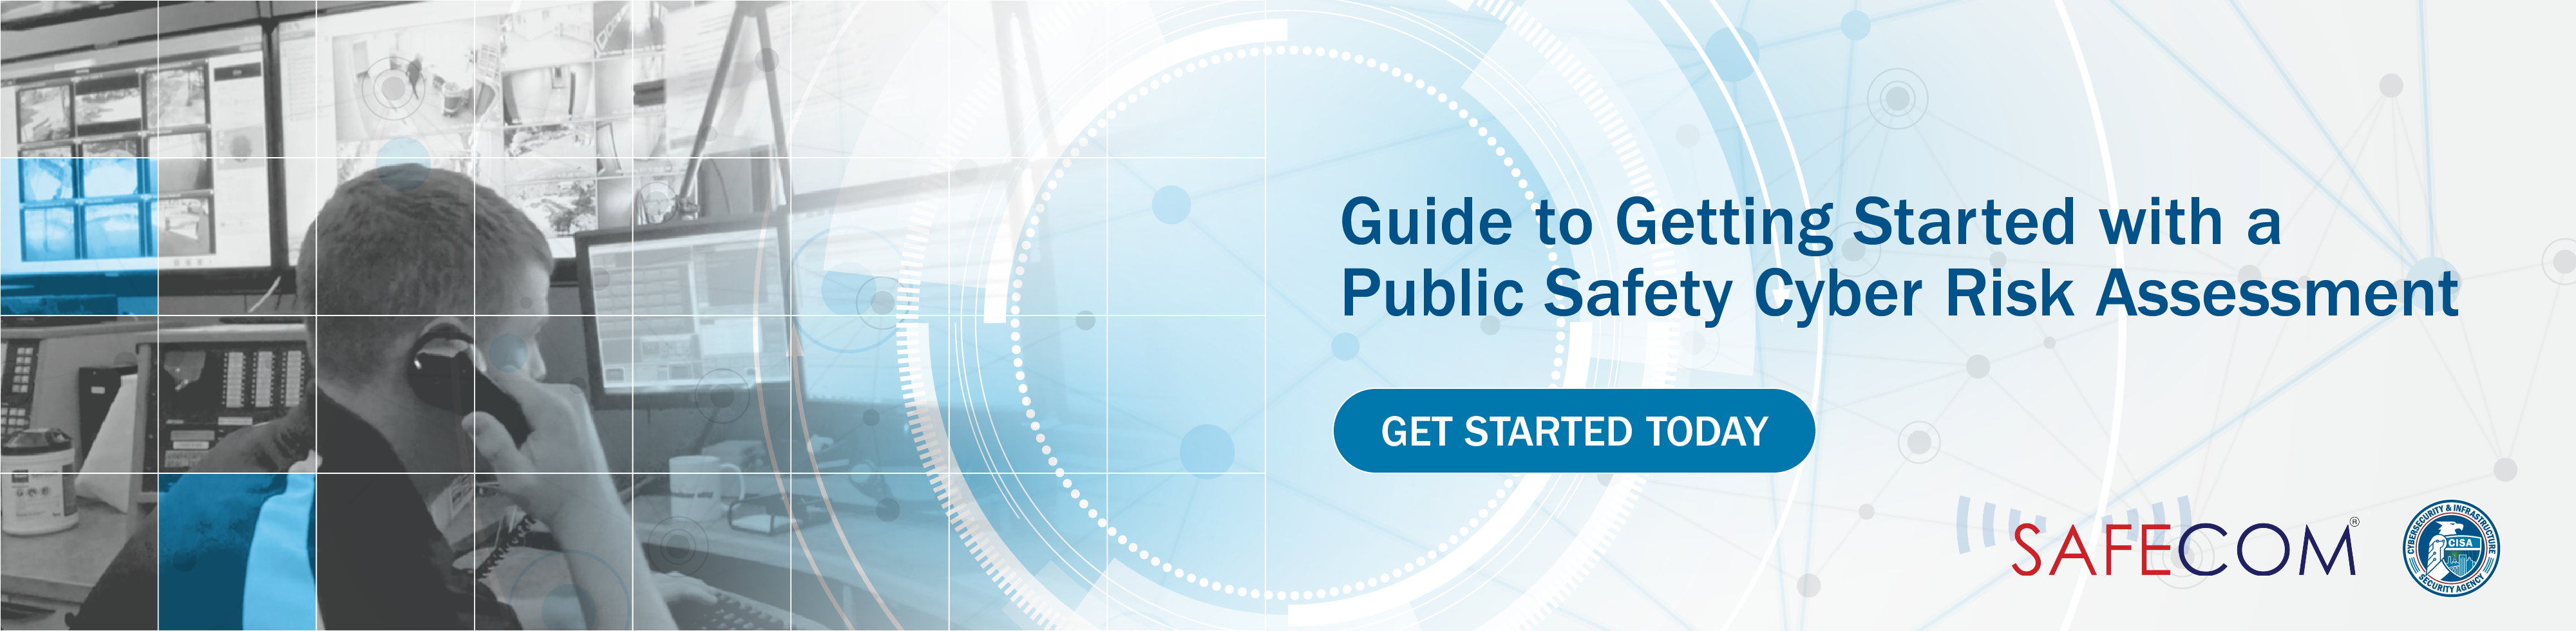 Guide to Getting Started with a Public Safety Cyber Risk Assessment, Get Started Today. SAFECOM and CISA Logo